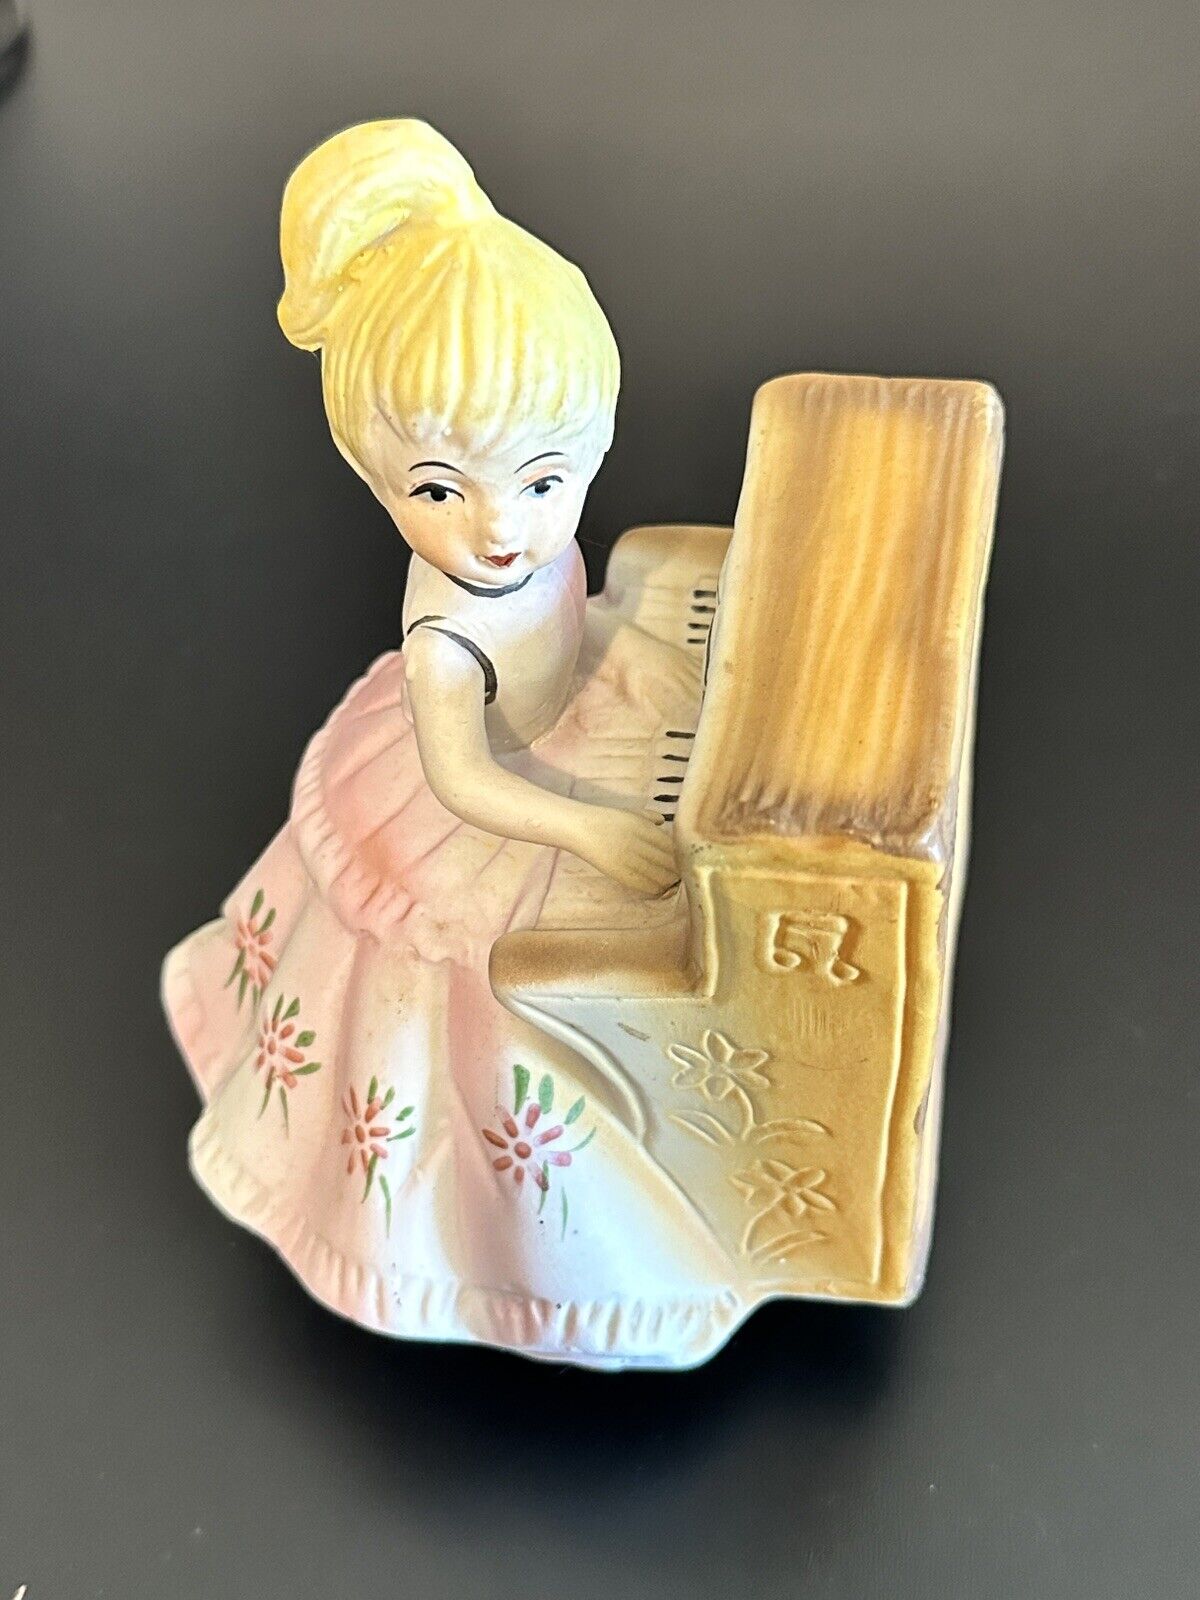 Piano Music Box Vintage Porcelain Girl Figurine Victorian Plays Music Turns